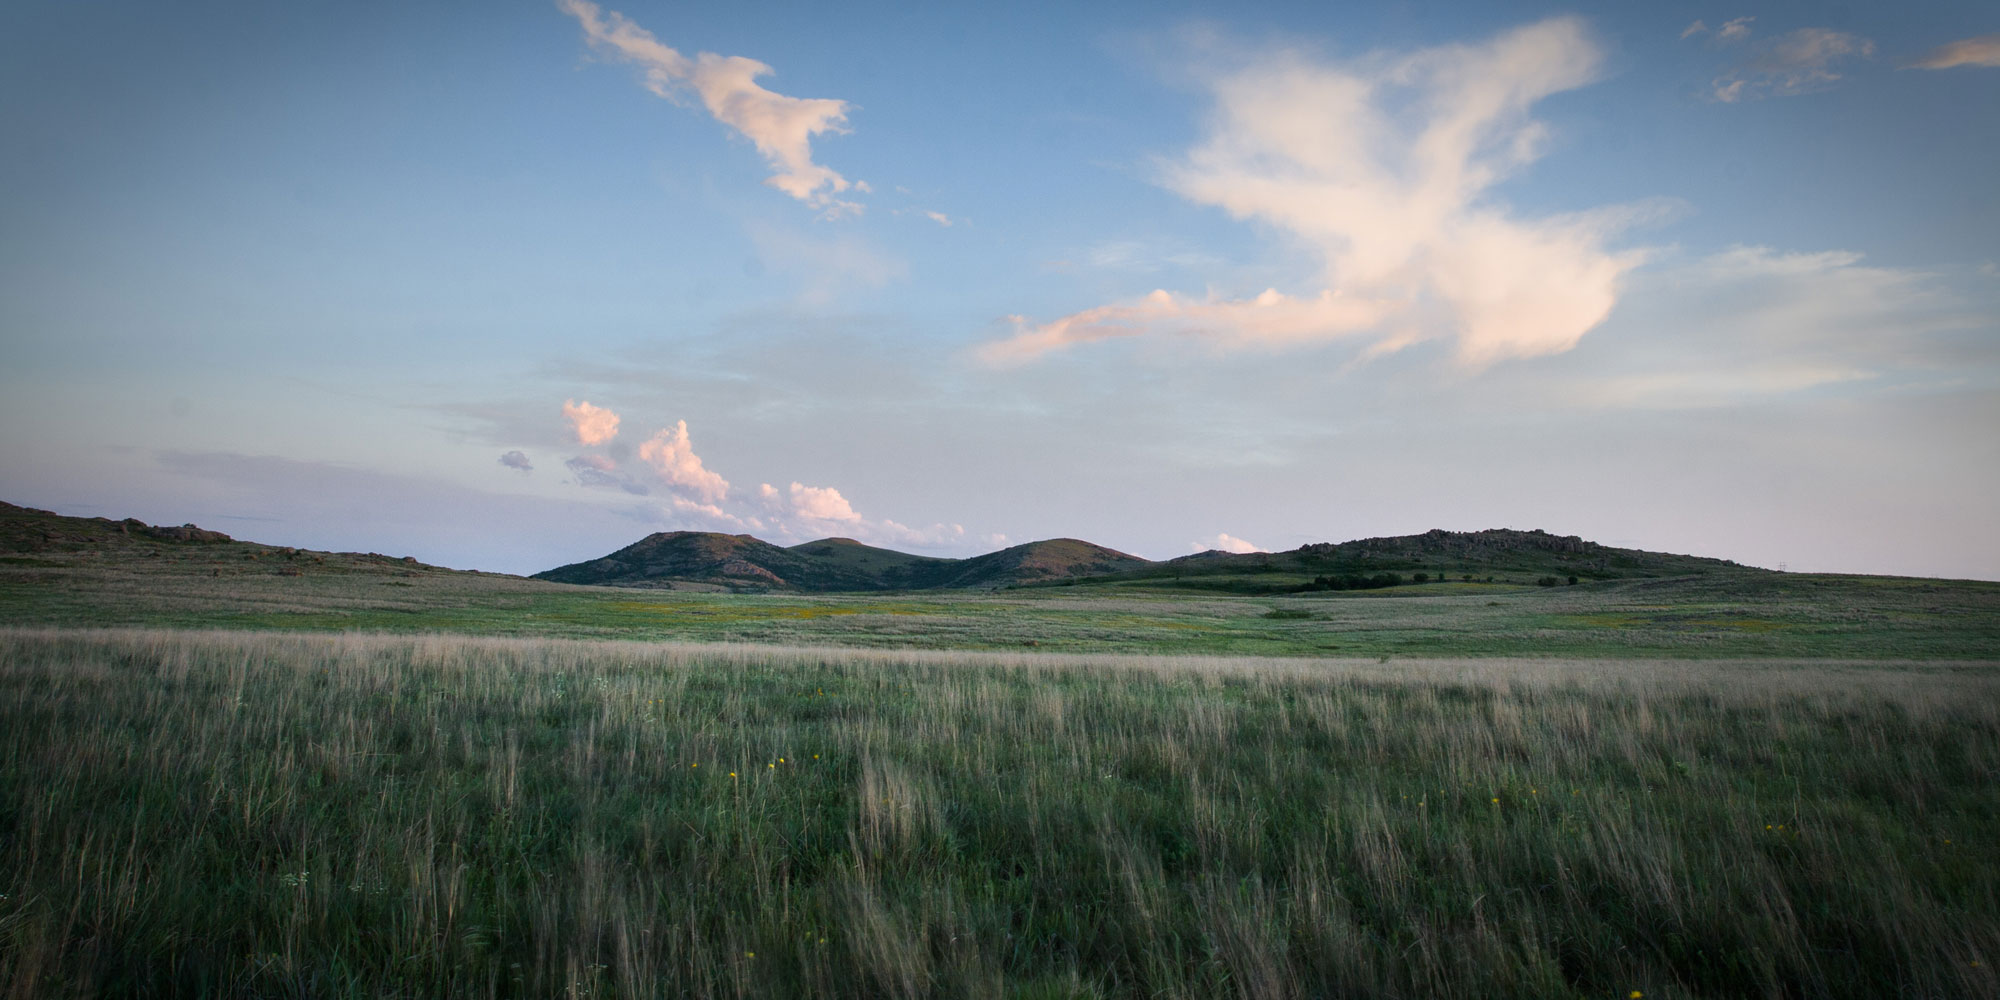 Photograph of tallgrass prairie with Wichita Mountains on the horizon and blue sky with wispy clouds. Photo taken in Oklahoma.